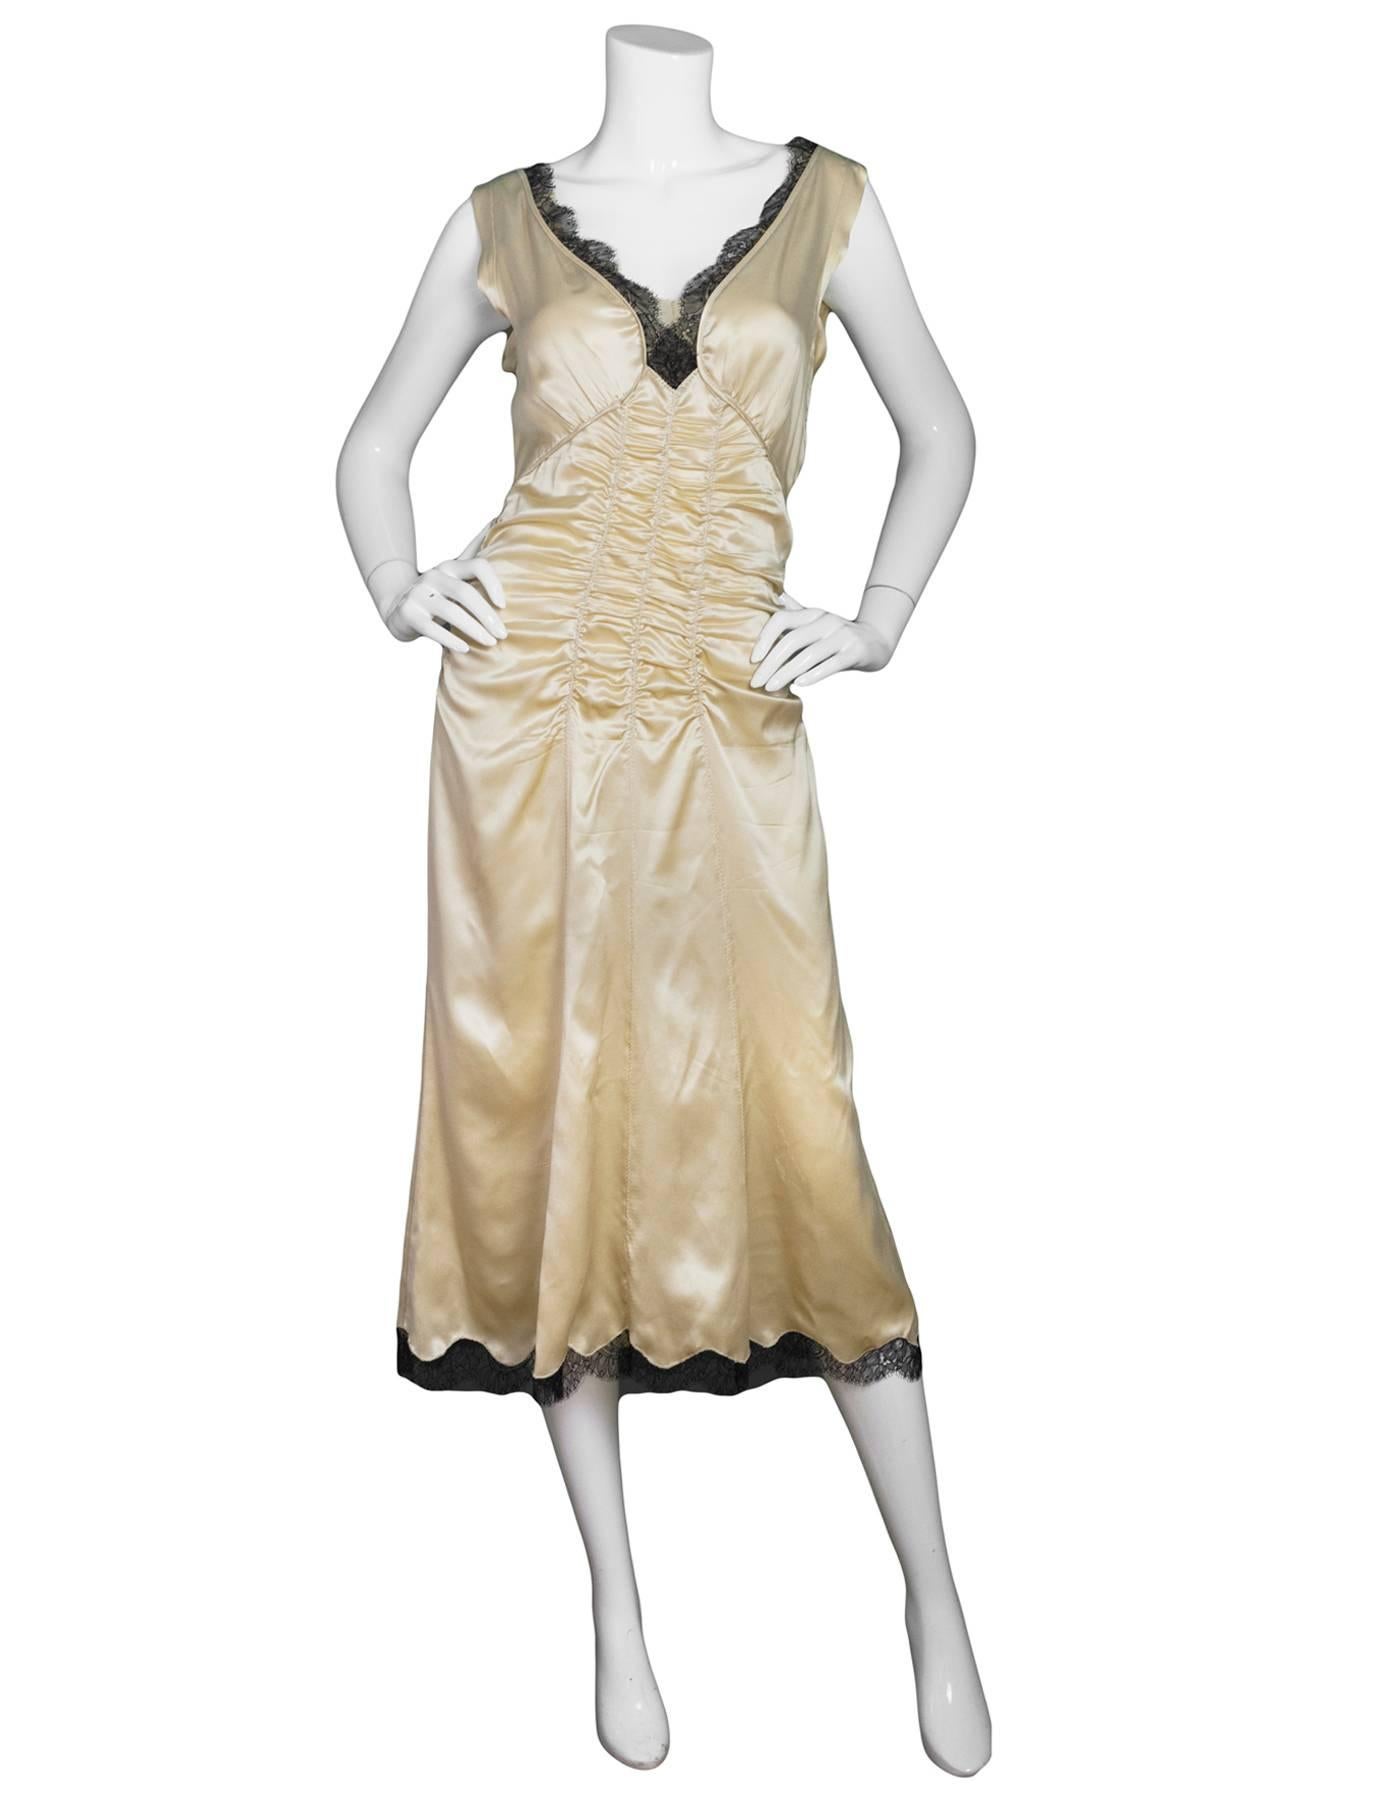 Prada Champagne Silk Ruched Slip Dress 
Features black lace trim at neck and hemline

Made In: Italy
Color: Champagne-beige
Composition: 100% silk
Lining: None
Closure/Opening: Side exposed zipper
Exterior Pockets: None
Interior Pockets: